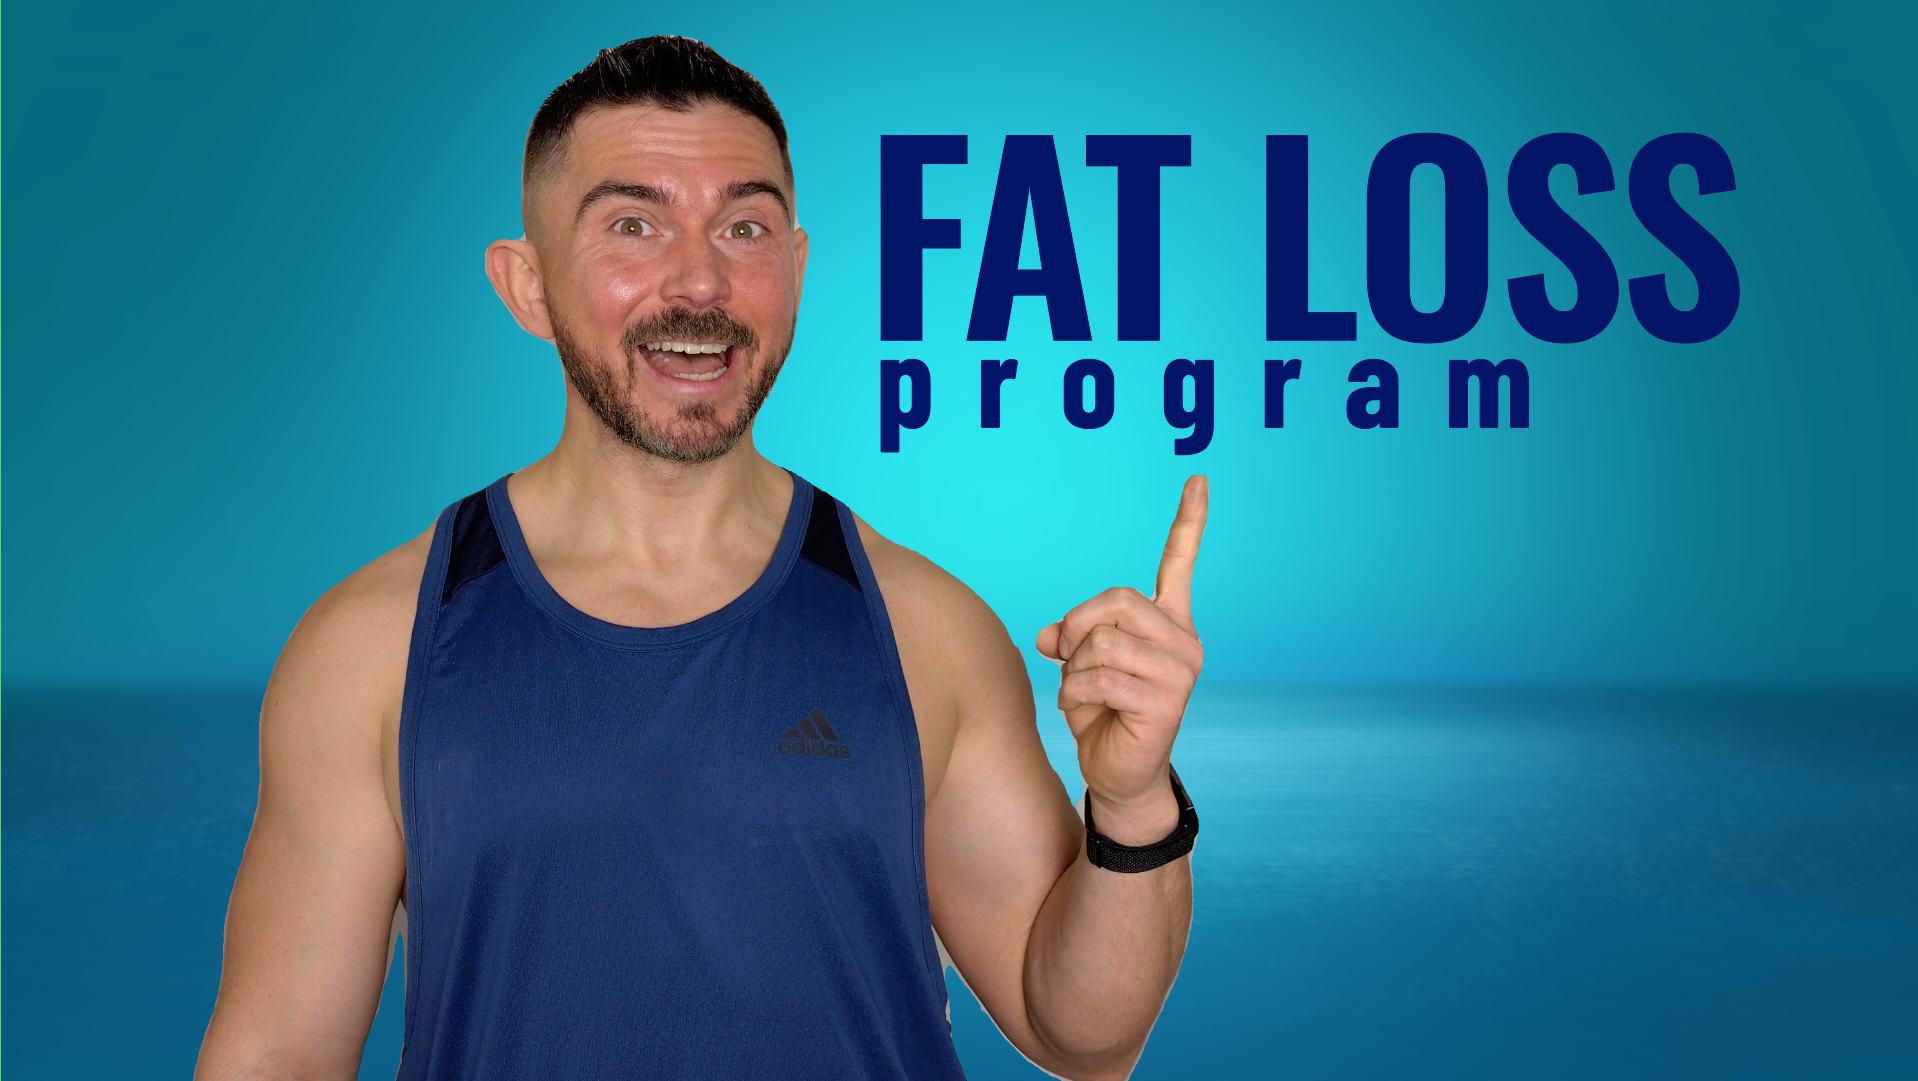 Fat Loss program open for new clients